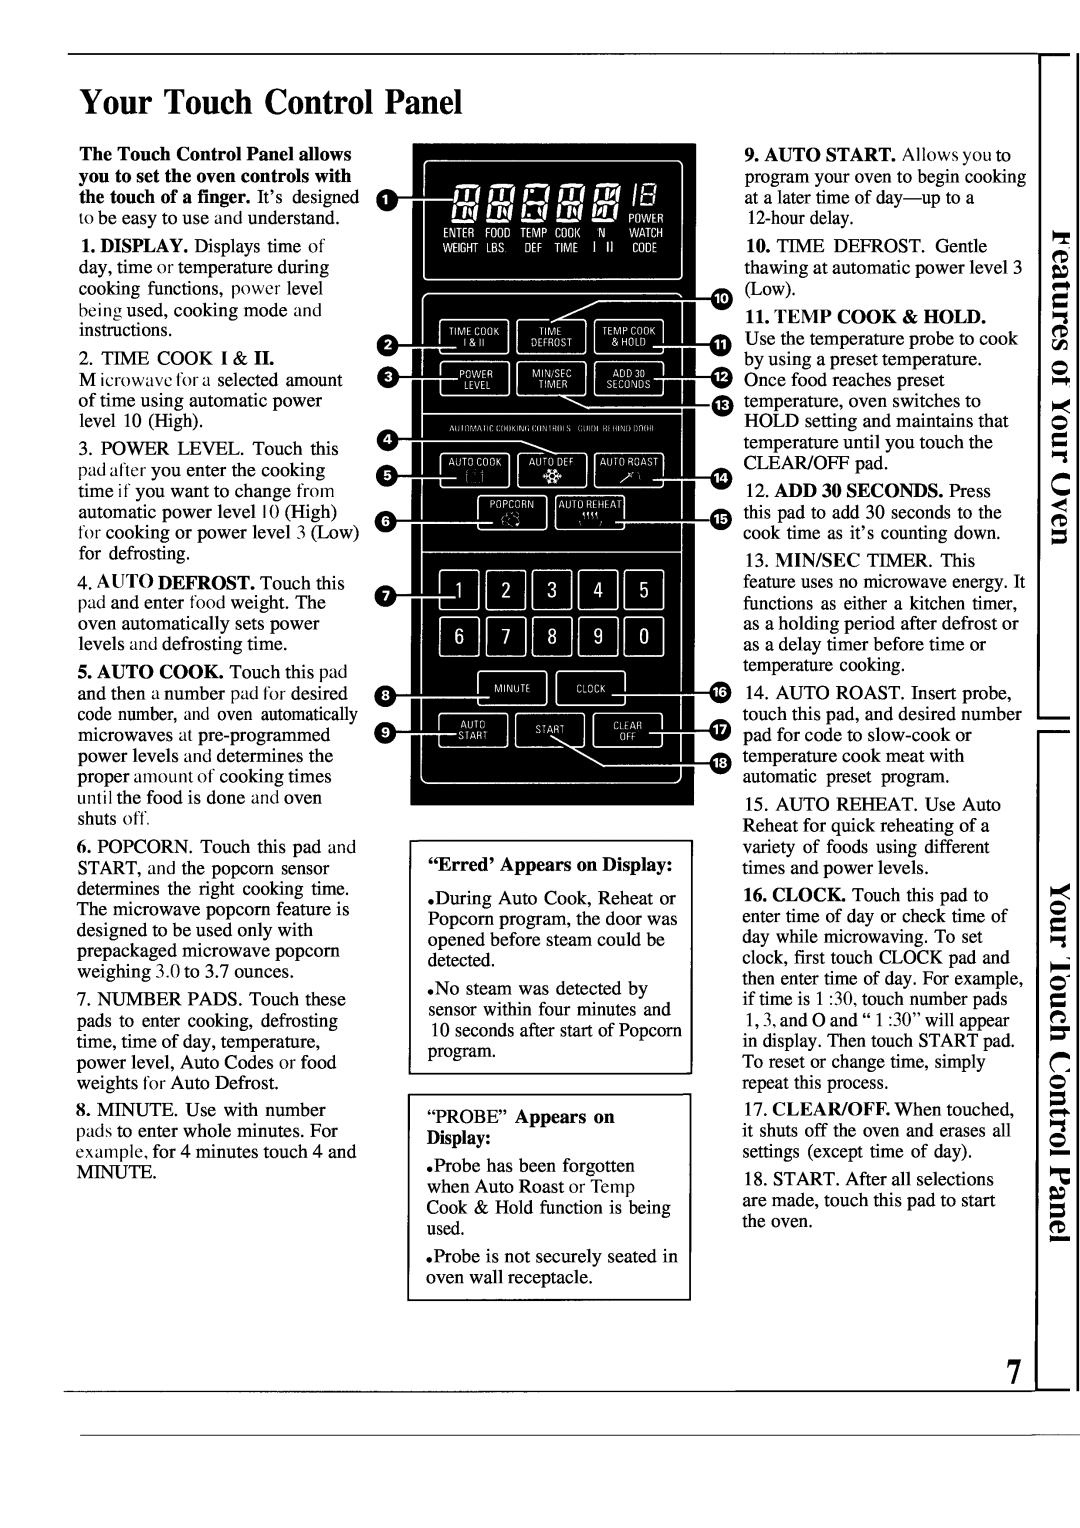 GE JEM31L manual Your Touch Control Panel, “Erred’ Appears on Display, “PROBE” Appears on Display, ADD 30 SECONDS. Press 